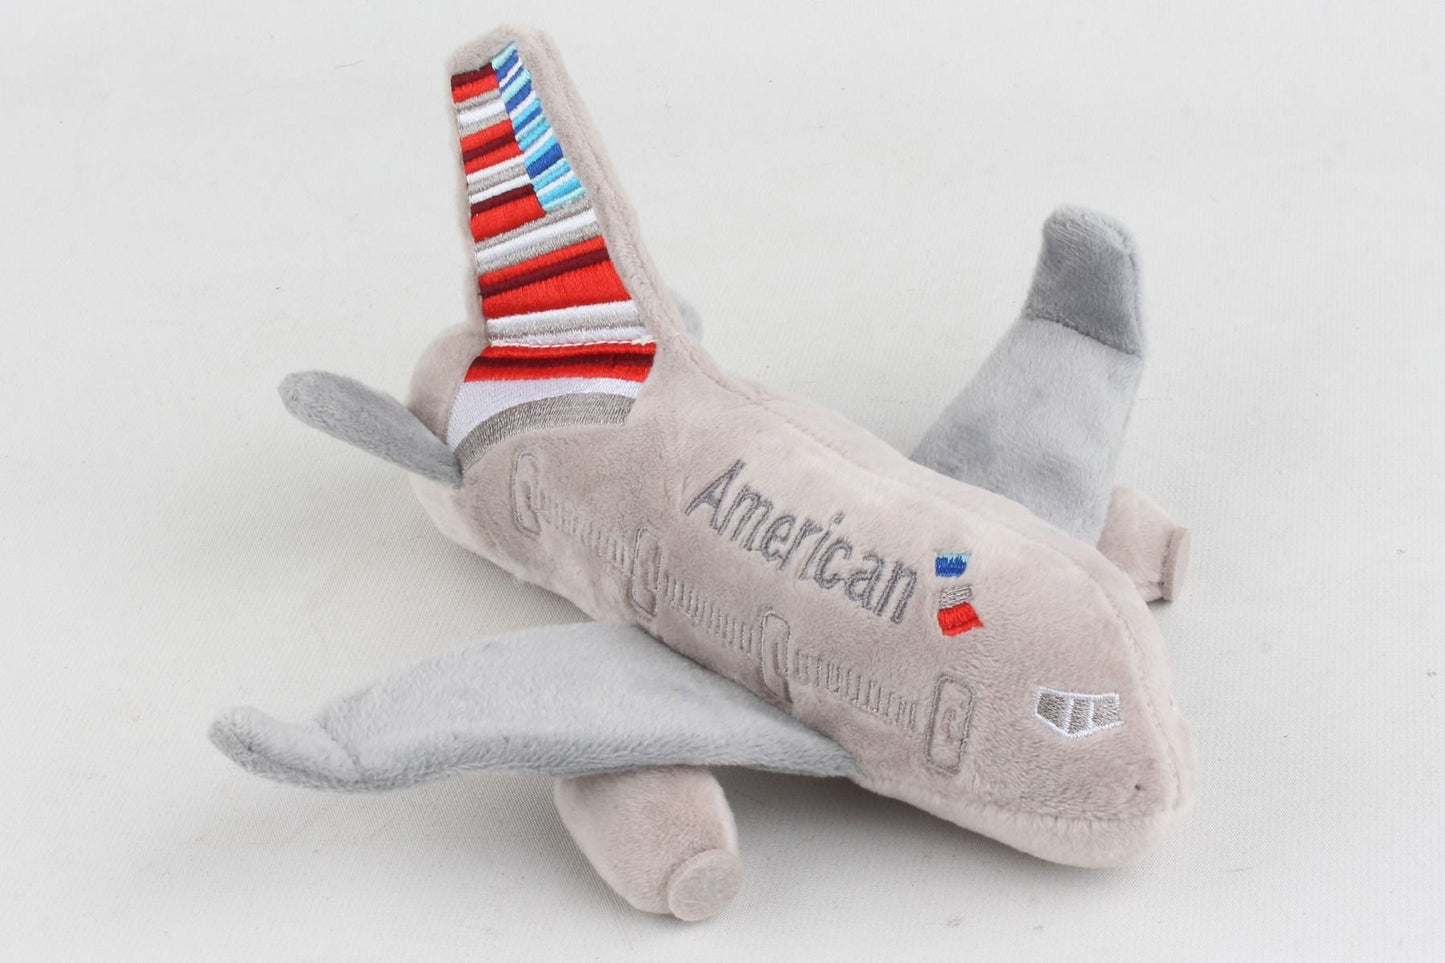 American Airlines Airplane Plush By Daron